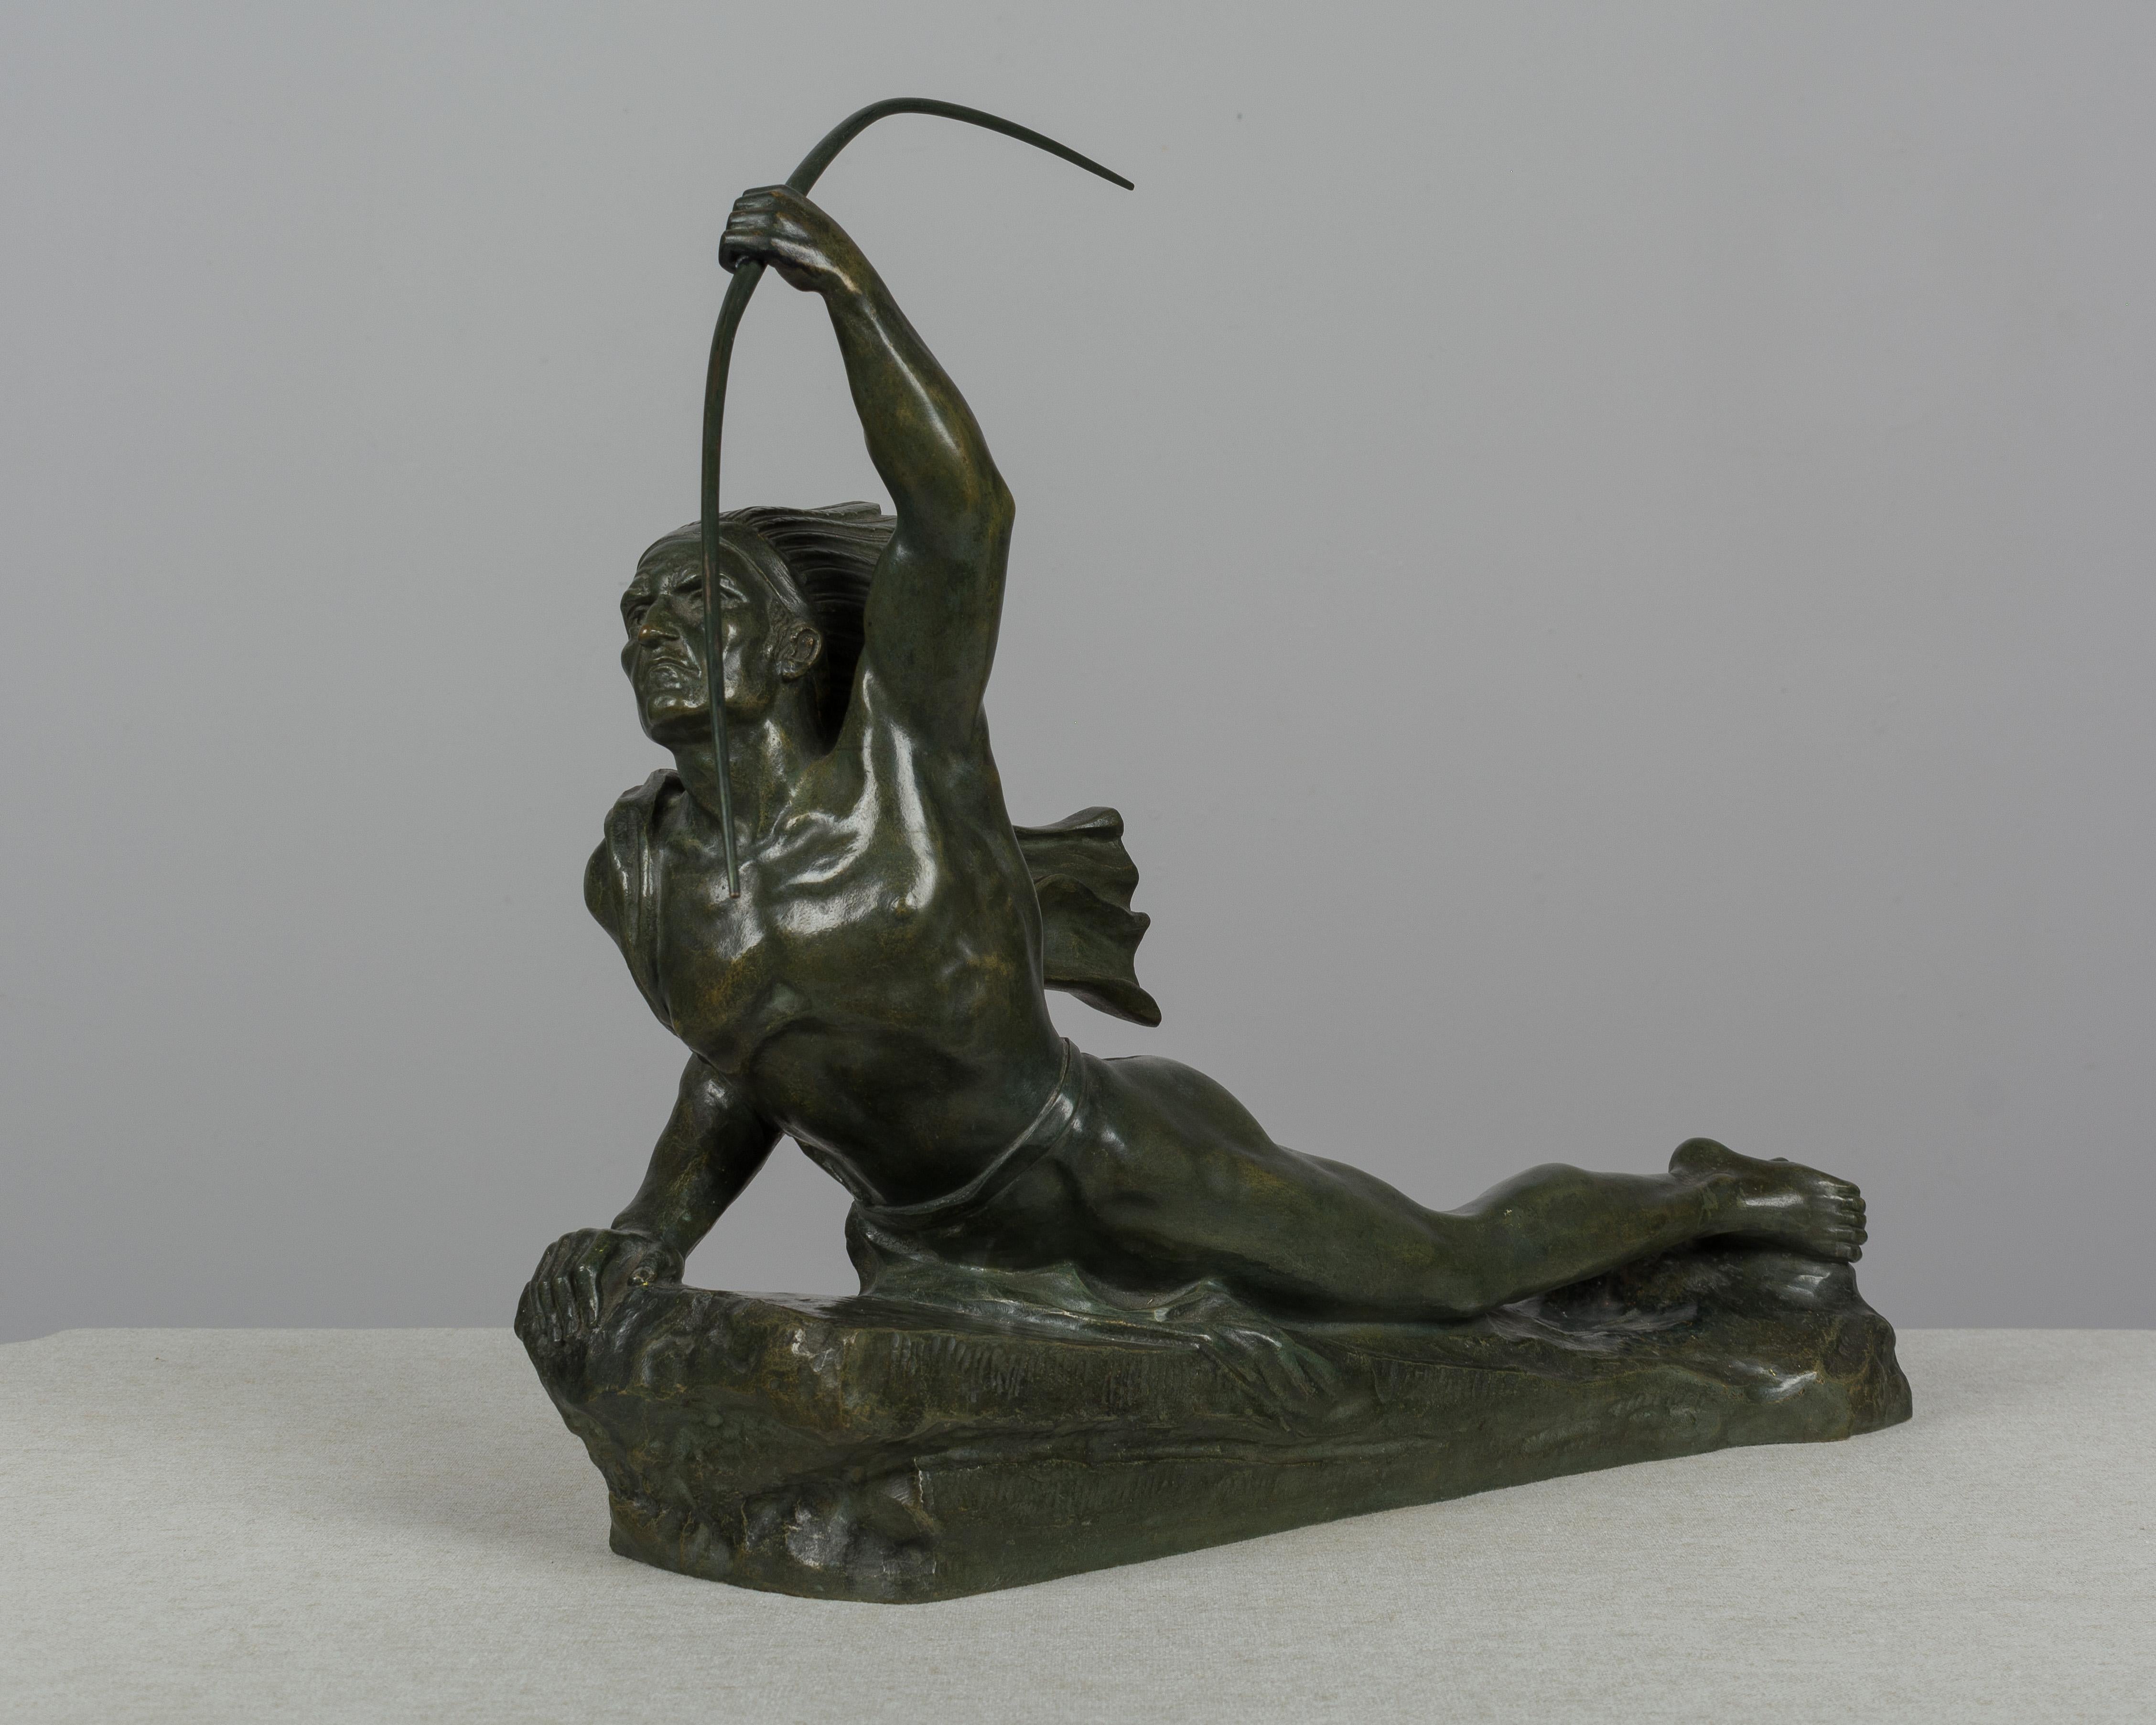 20th Century French Art Deco Bronze by Marcel André Bouraine